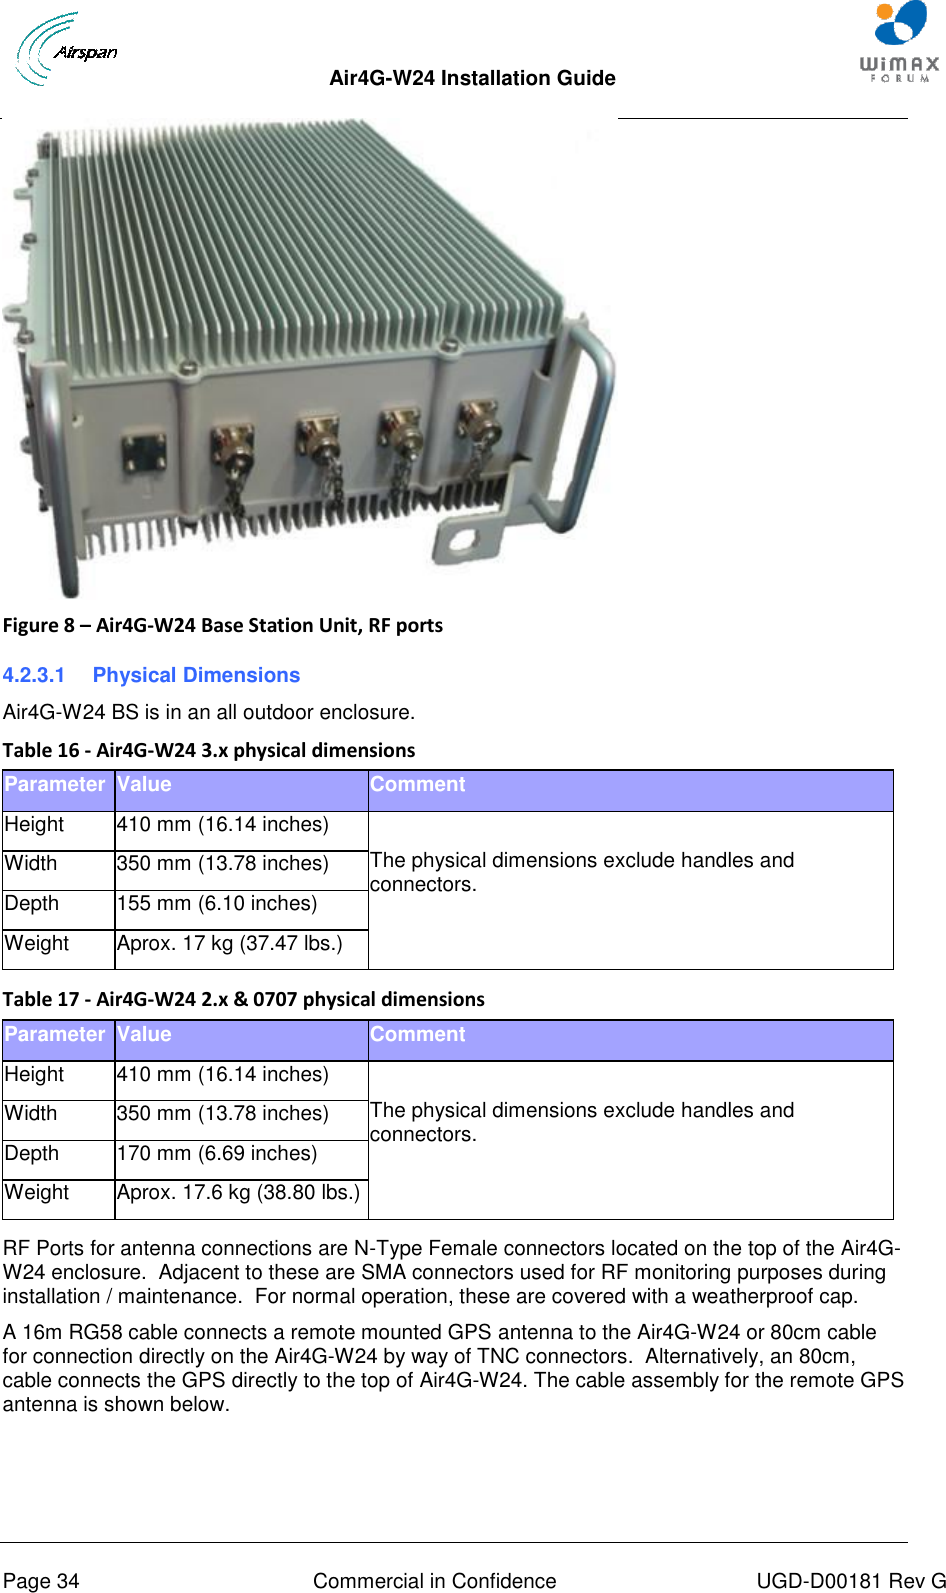  Air4G-W24 Installation Guide       Page 34  Commercial in Confidence  UGD-D00181 Rev G  Figure 8 – Air4G-W24 Base Station Unit, RF ports 4.2.3.1  Physical Dimensions Air4G-W24 BS is in an all outdoor enclosure. Table 16 - Air4G-W24 3.x physical dimensions Parameter Value Comment Height 410 mm (16.14 inches)  The physical dimensions exclude handles and connectors. Width 350 mm (13.78 inches) Depth 155 mm (6.10 inches) Weight Aprox. 17 kg (37.47 lbs.)  Table 17 - Air4G-W24 2.x &amp; 0707 physical dimensions Parameter Value Comment Height 410 mm (16.14 inches)  The physical dimensions exclude handles and connectors. Width 350 mm (13.78 inches) Depth 170 mm (6.69 inches) Weight Aprox. 17.6 kg (38.80 lbs.)  RF Ports for antenna connections are N-Type Female connectors located on the top of the Air4G-W24 enclosure.  Adjacent to these are SMA connectors used for RF monitoring purposes during installation / maintenance.  For normal operation, these are covered with a weatherproof cap. A 16m RG58 cable connects a remote mounted GPS antenna to the Air4G-W24 or 80cm cable for connection directly on the Air4G-W24 by way of TNC connectors.  Alternatively, an 80cm, cable connects the GPS directly to the top of Air4G-W24. The cable assembly for the remote GPS antenna is shown below.  